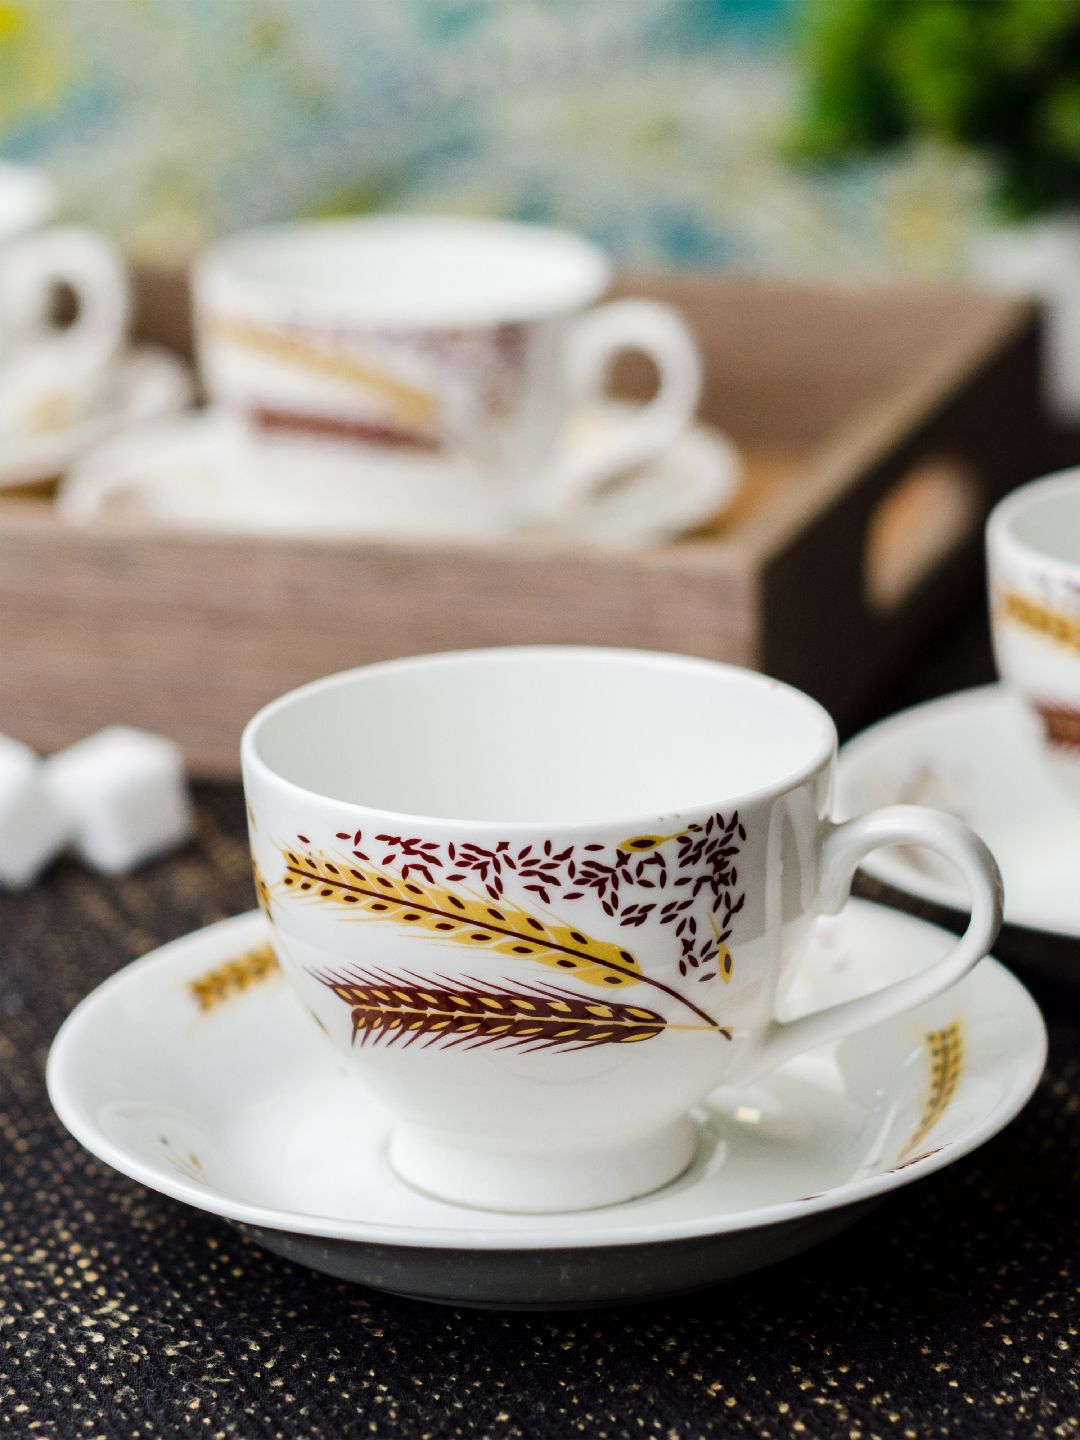 SONAKI White Set of 12 Printed Bone China Cups and Saucers Price in India